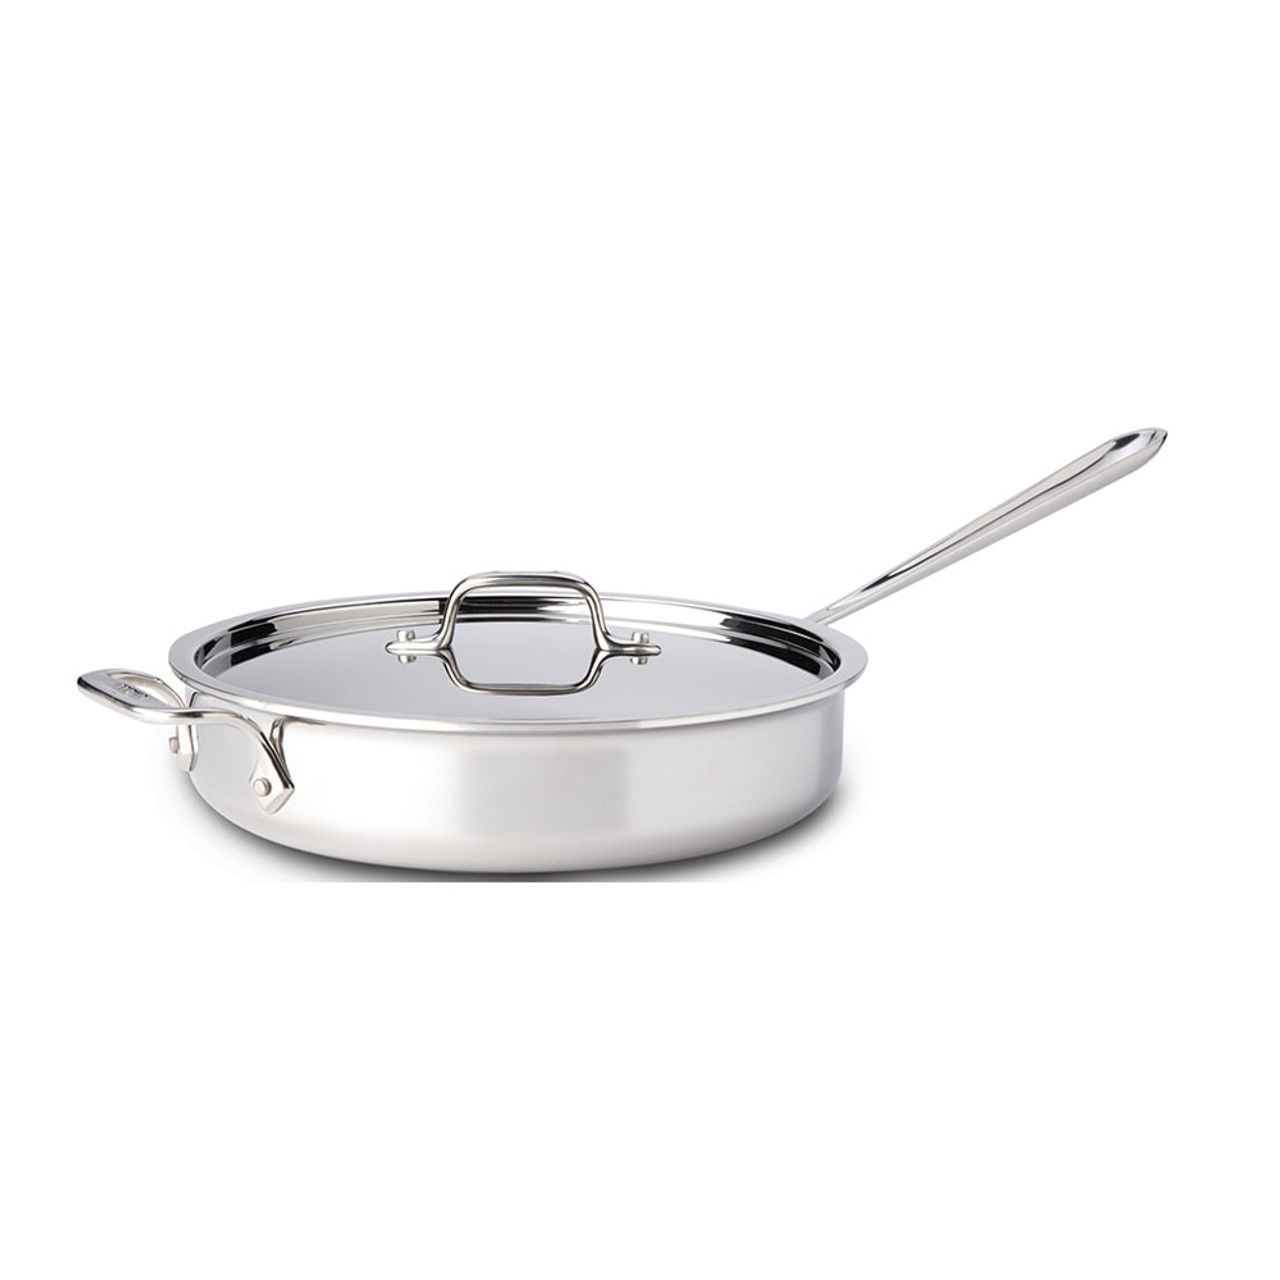 https://cdn11.bigcommerce.com/s-hccytny0od/images/stencil/1280x1280/products/484/8439/all-clad-stainless-steel-saute-pan-3qt__68717.1598234950.jpg?c=2?imbypass=on